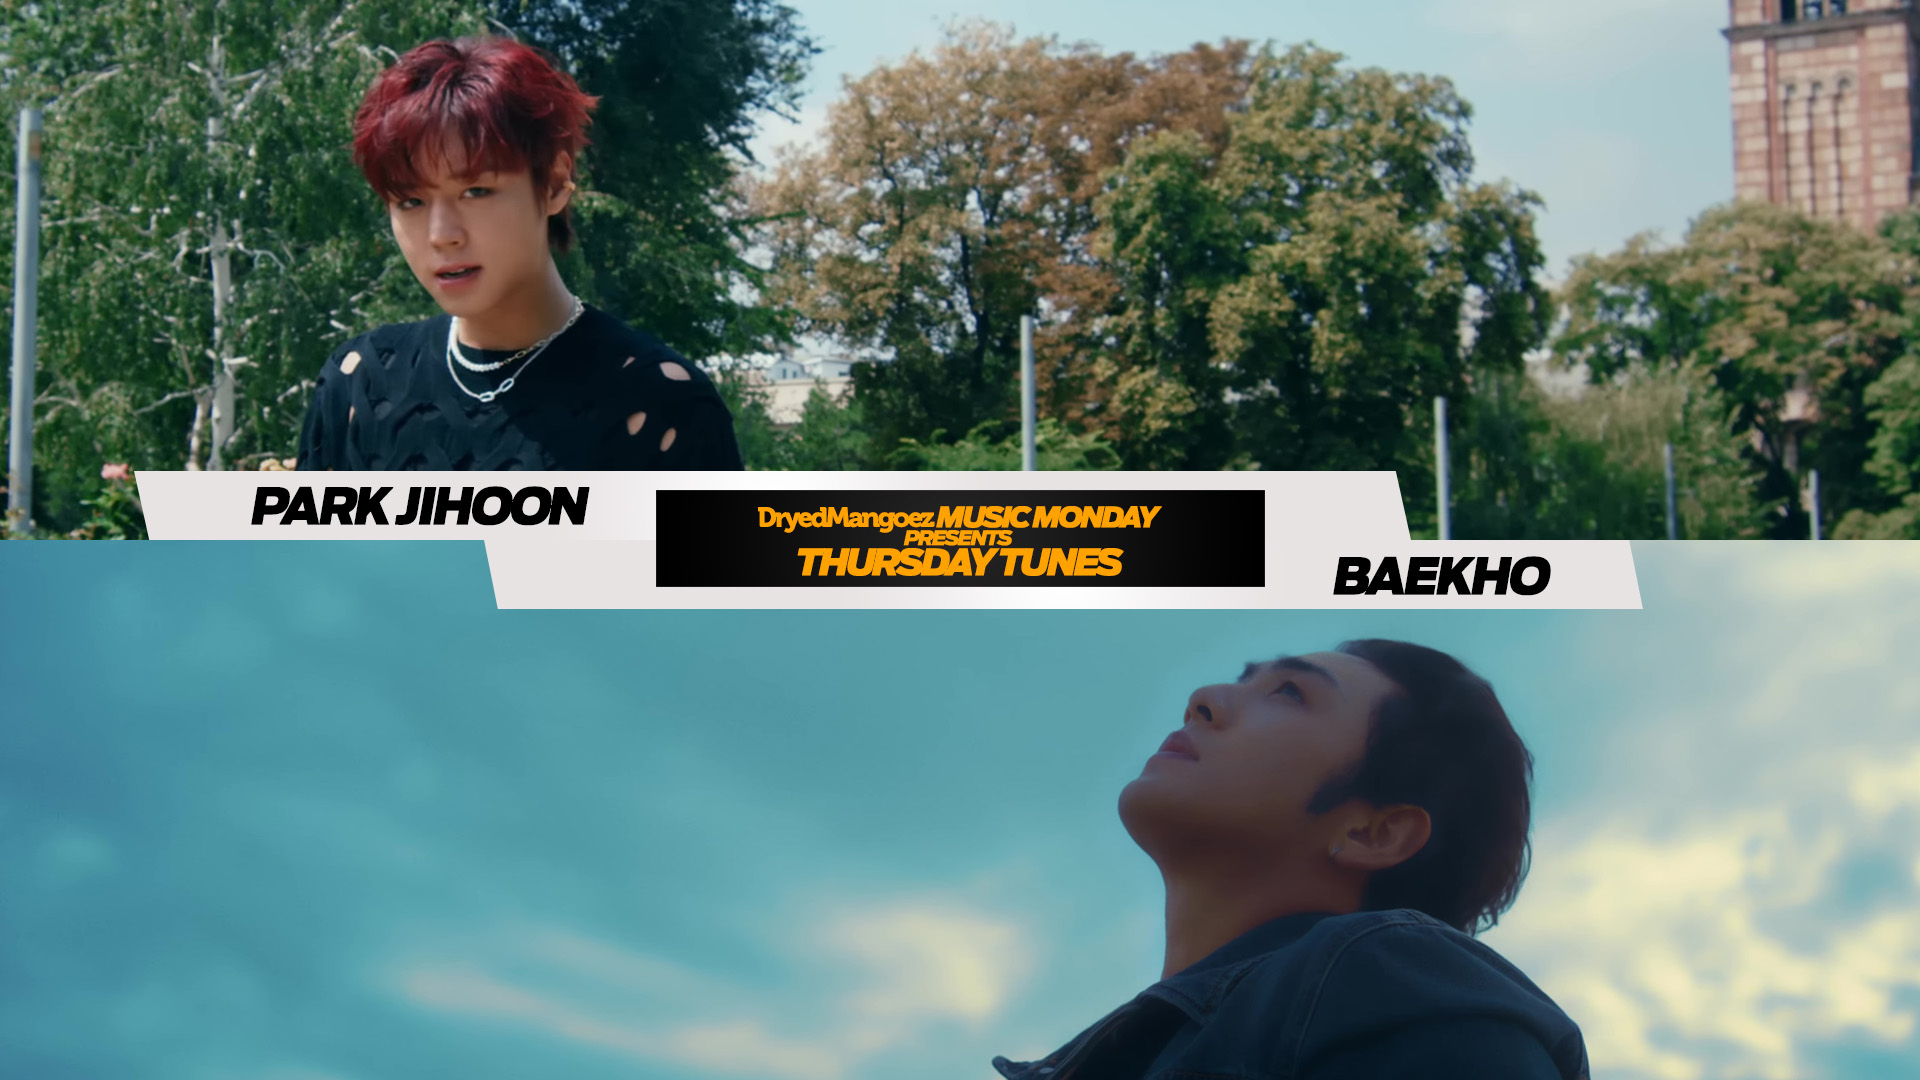 Thursday Tunes, October 13, 2022 – Fresh Tracks from Two of My Favorites, Park Jihoon and Baekho